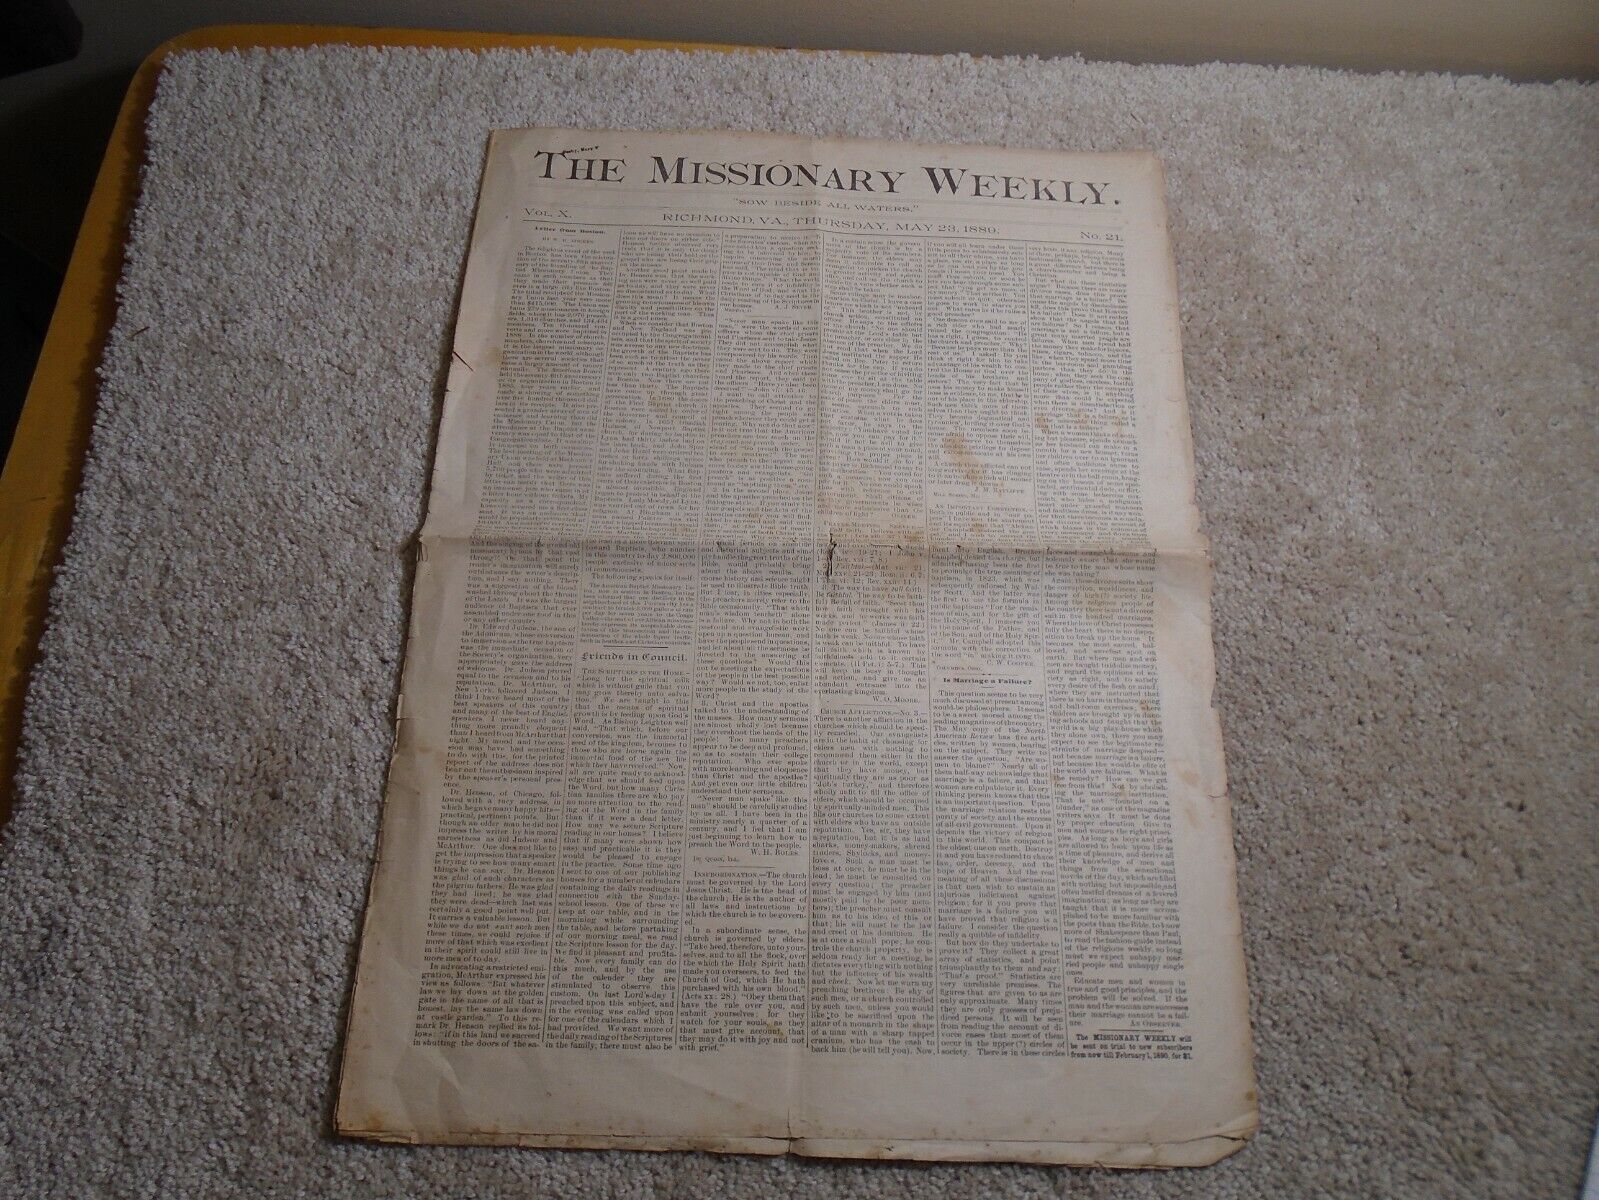 1889 The Missionary Weekly Newspaper, Richmond Virginia, Christianity Religion